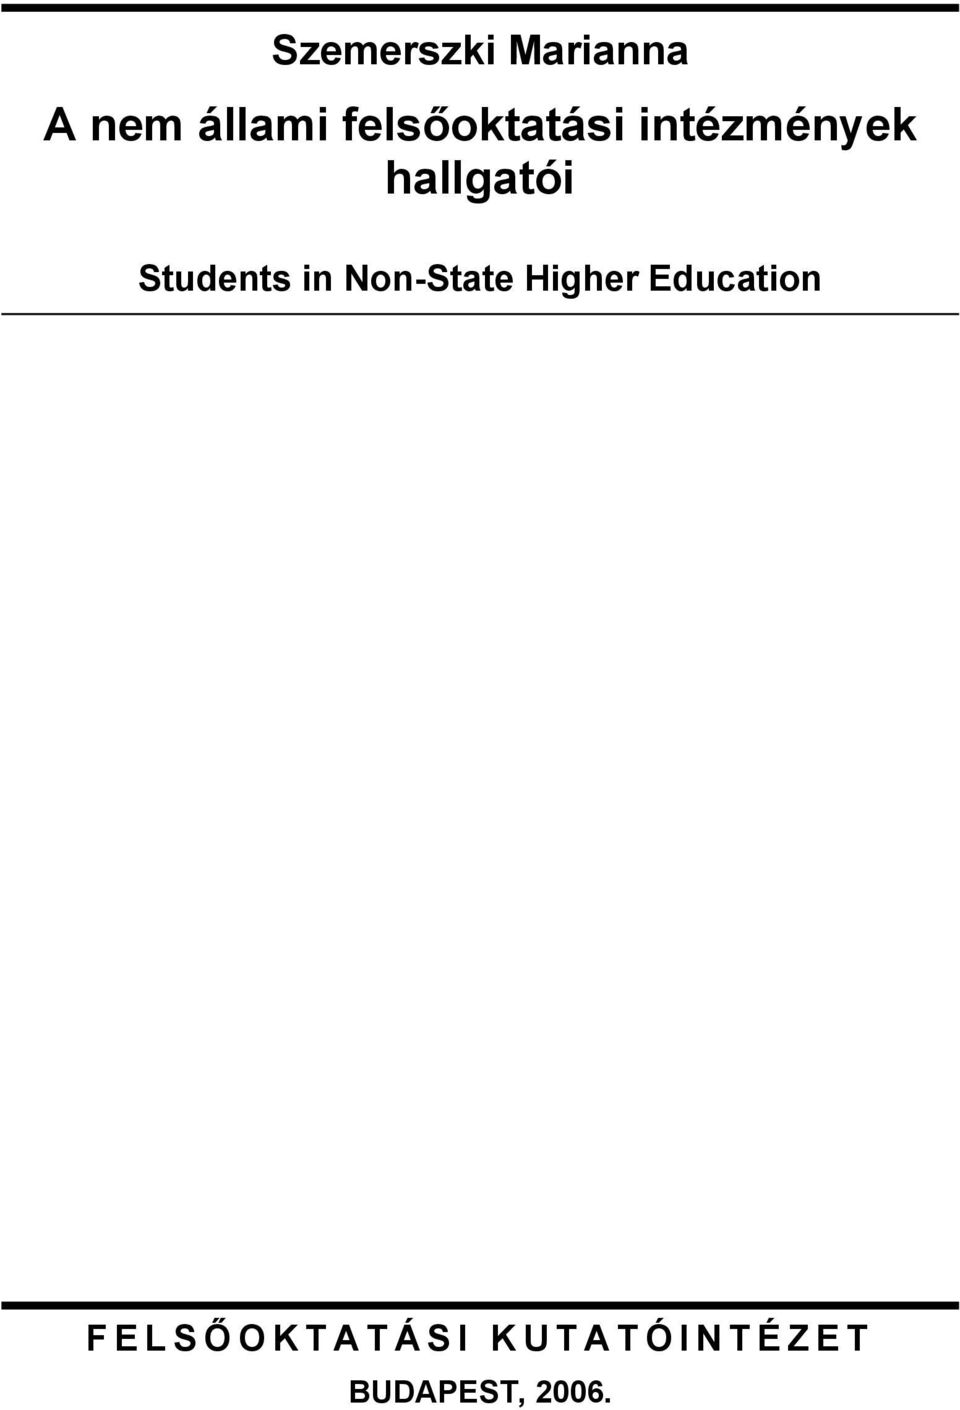 Students in Non-State Higher